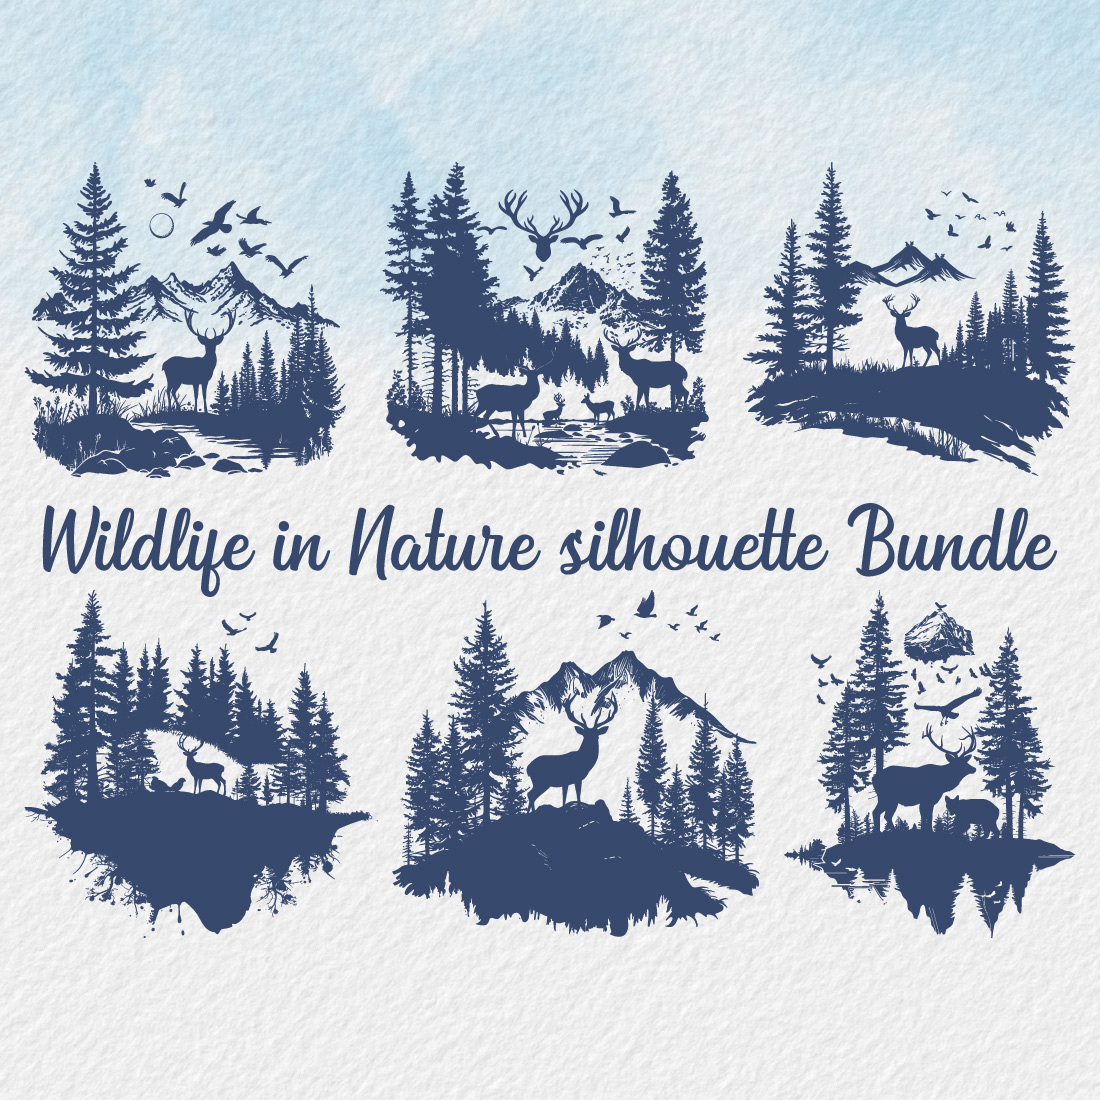 Wildlife in Nature Silhouette bundle, wild animal wildlife silhouette, forest silhouette illustration, Beautiful design for wildlife preservation, environmental awareness, deer, birds, bears trees, mountains preview image.